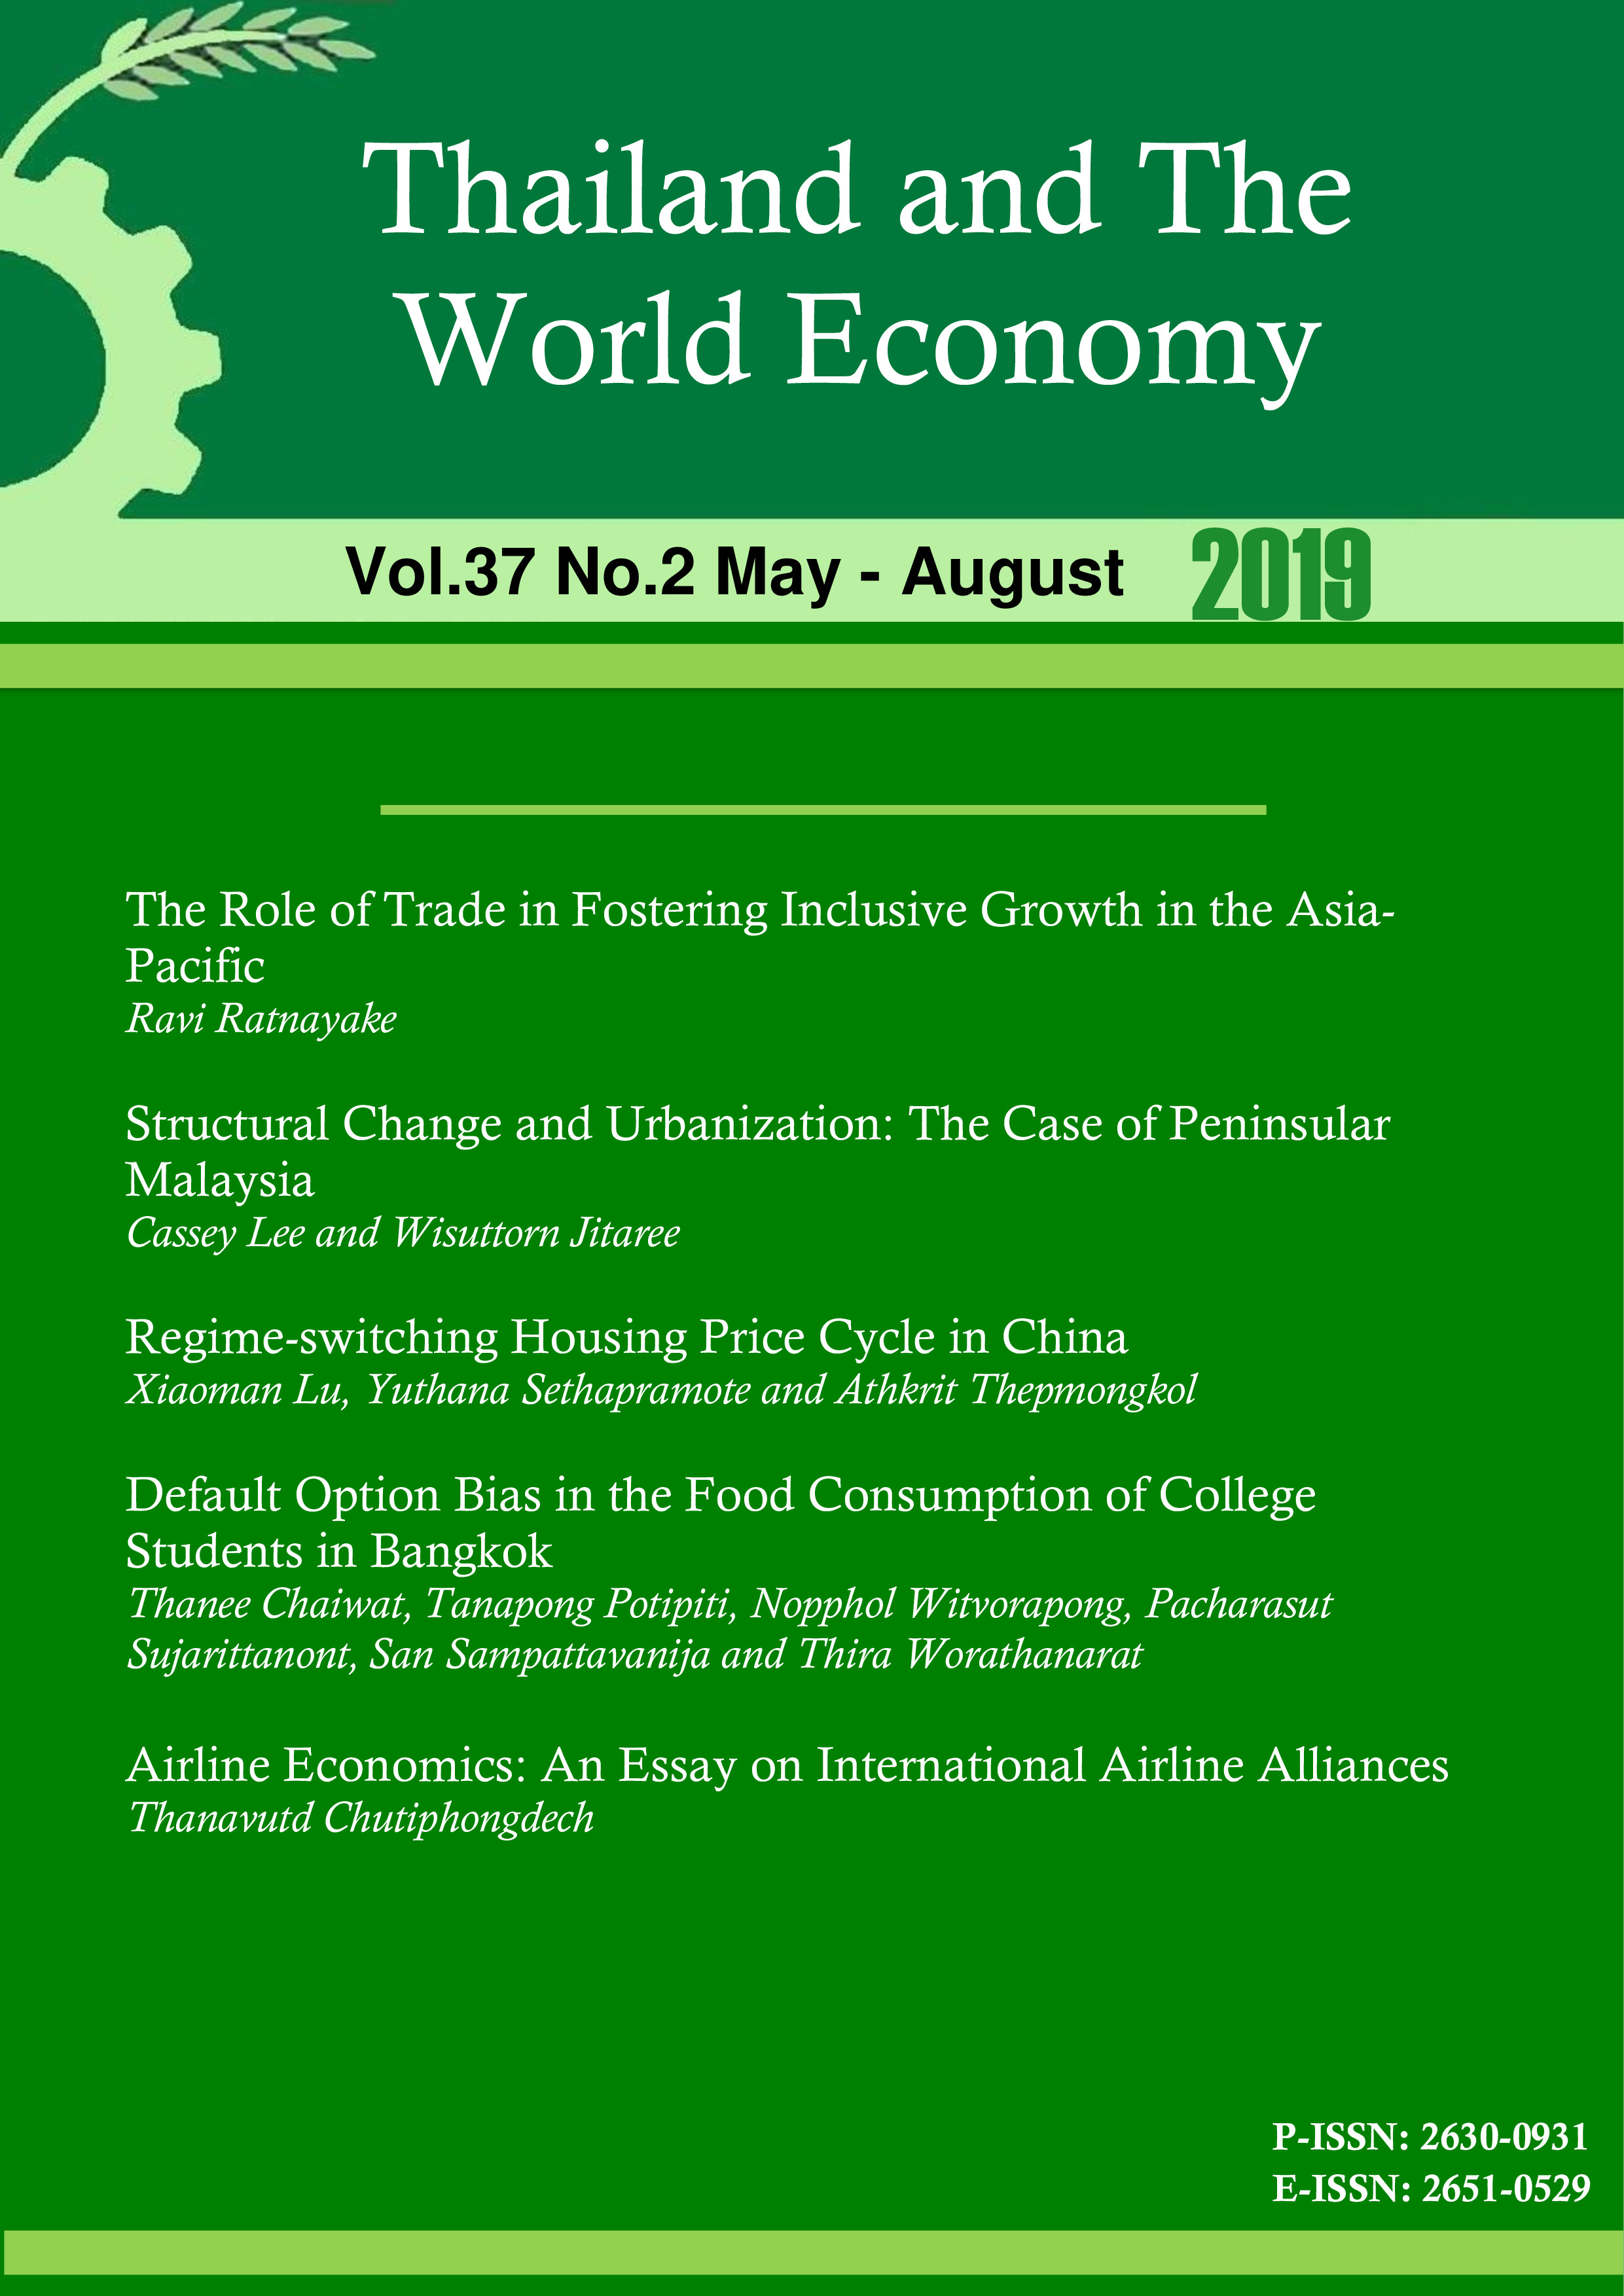 					View Vol. 37 No. 2 (2019): Thailand and The World Economy
				